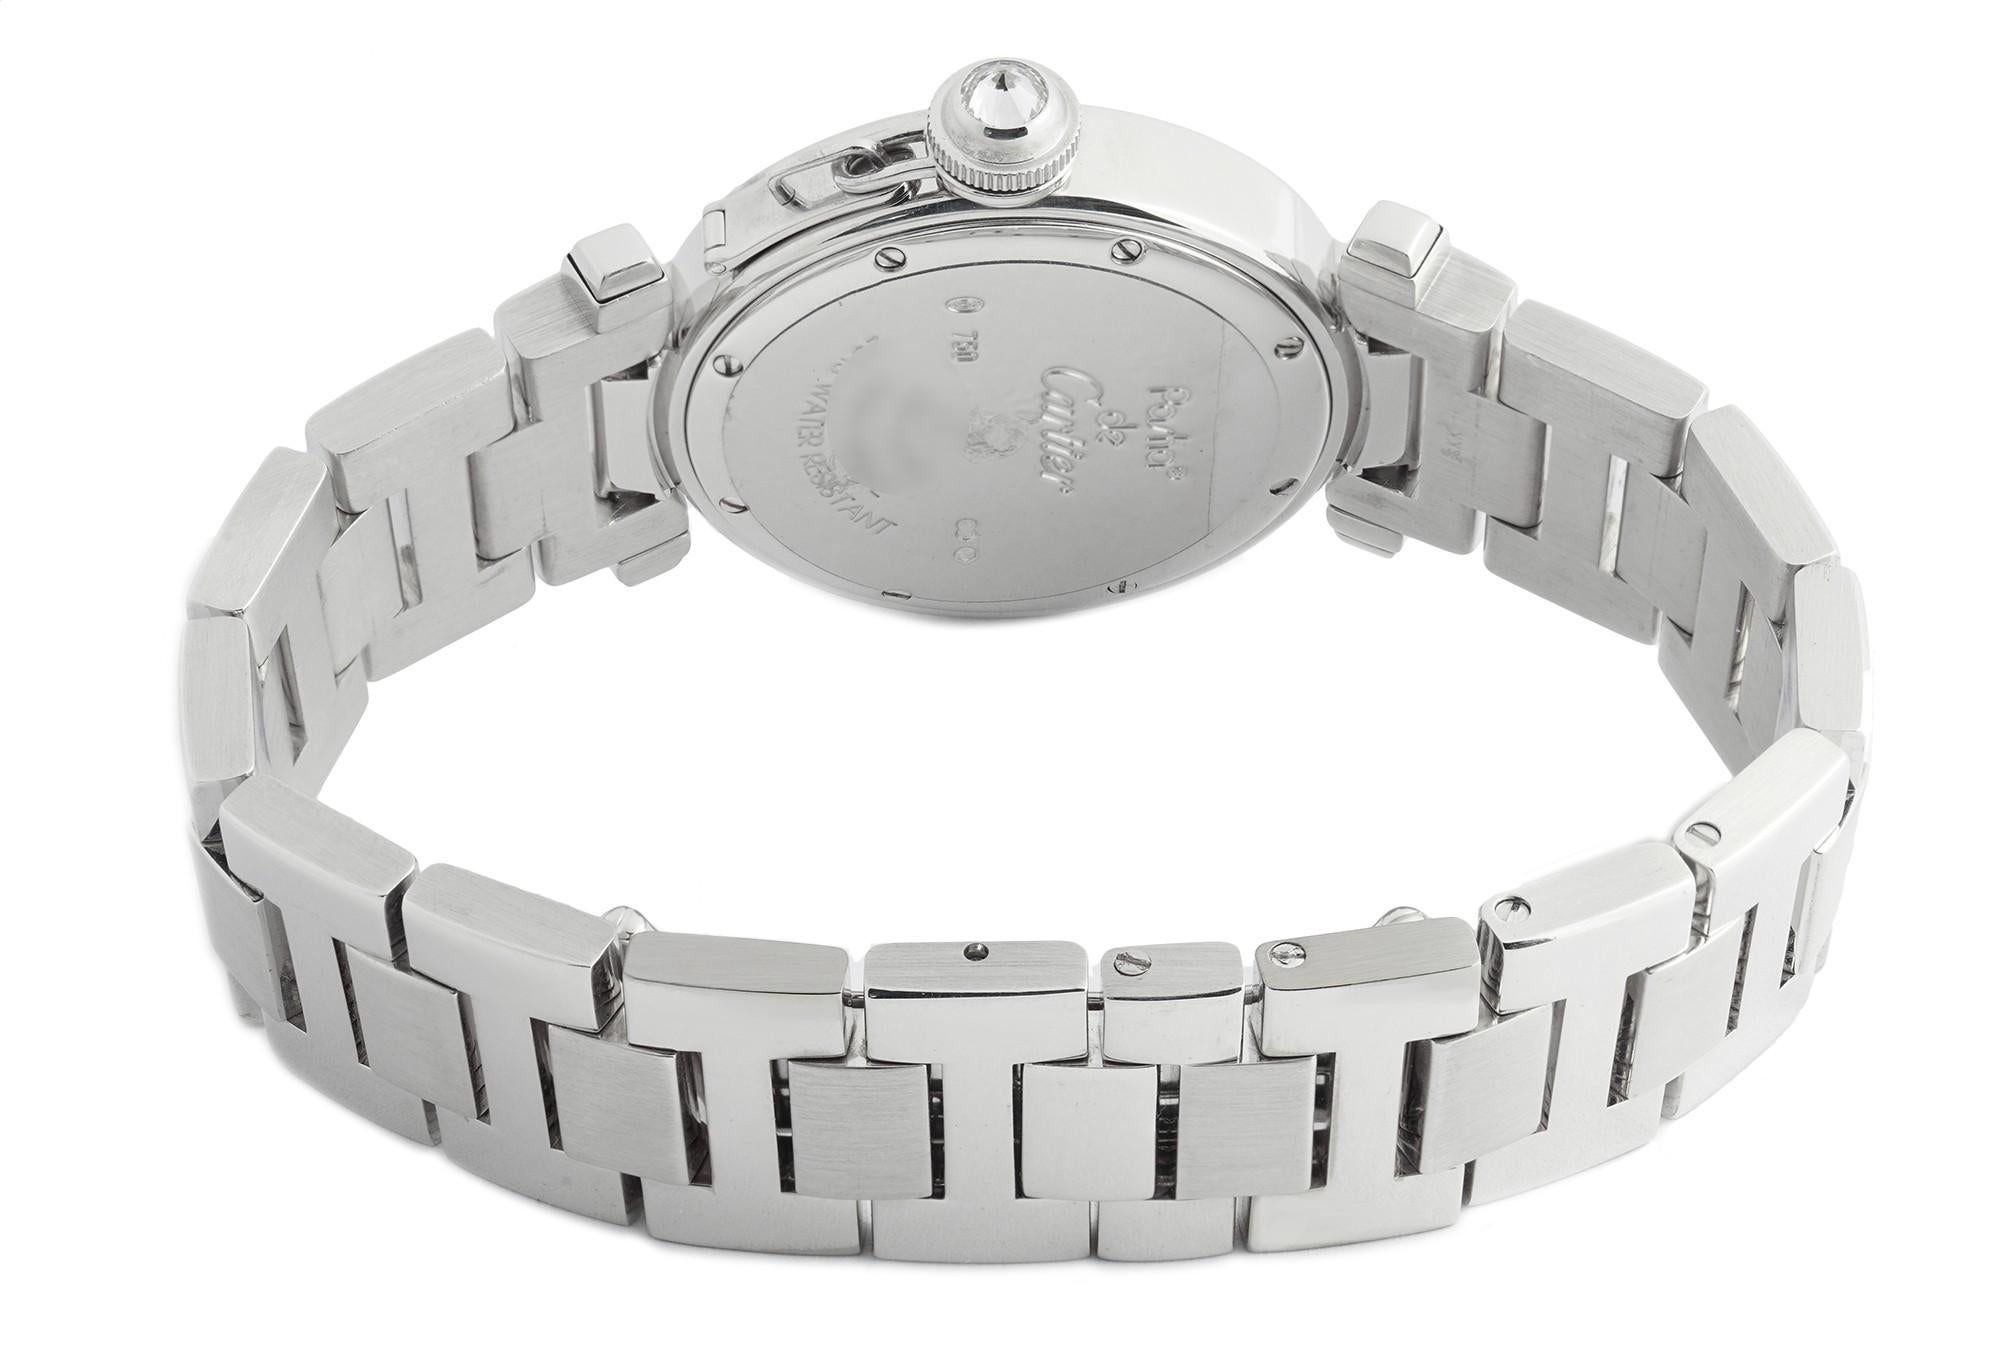 Contemporary Cartier Pasha WJ11924G, Silver Dial, Certified and Warranty